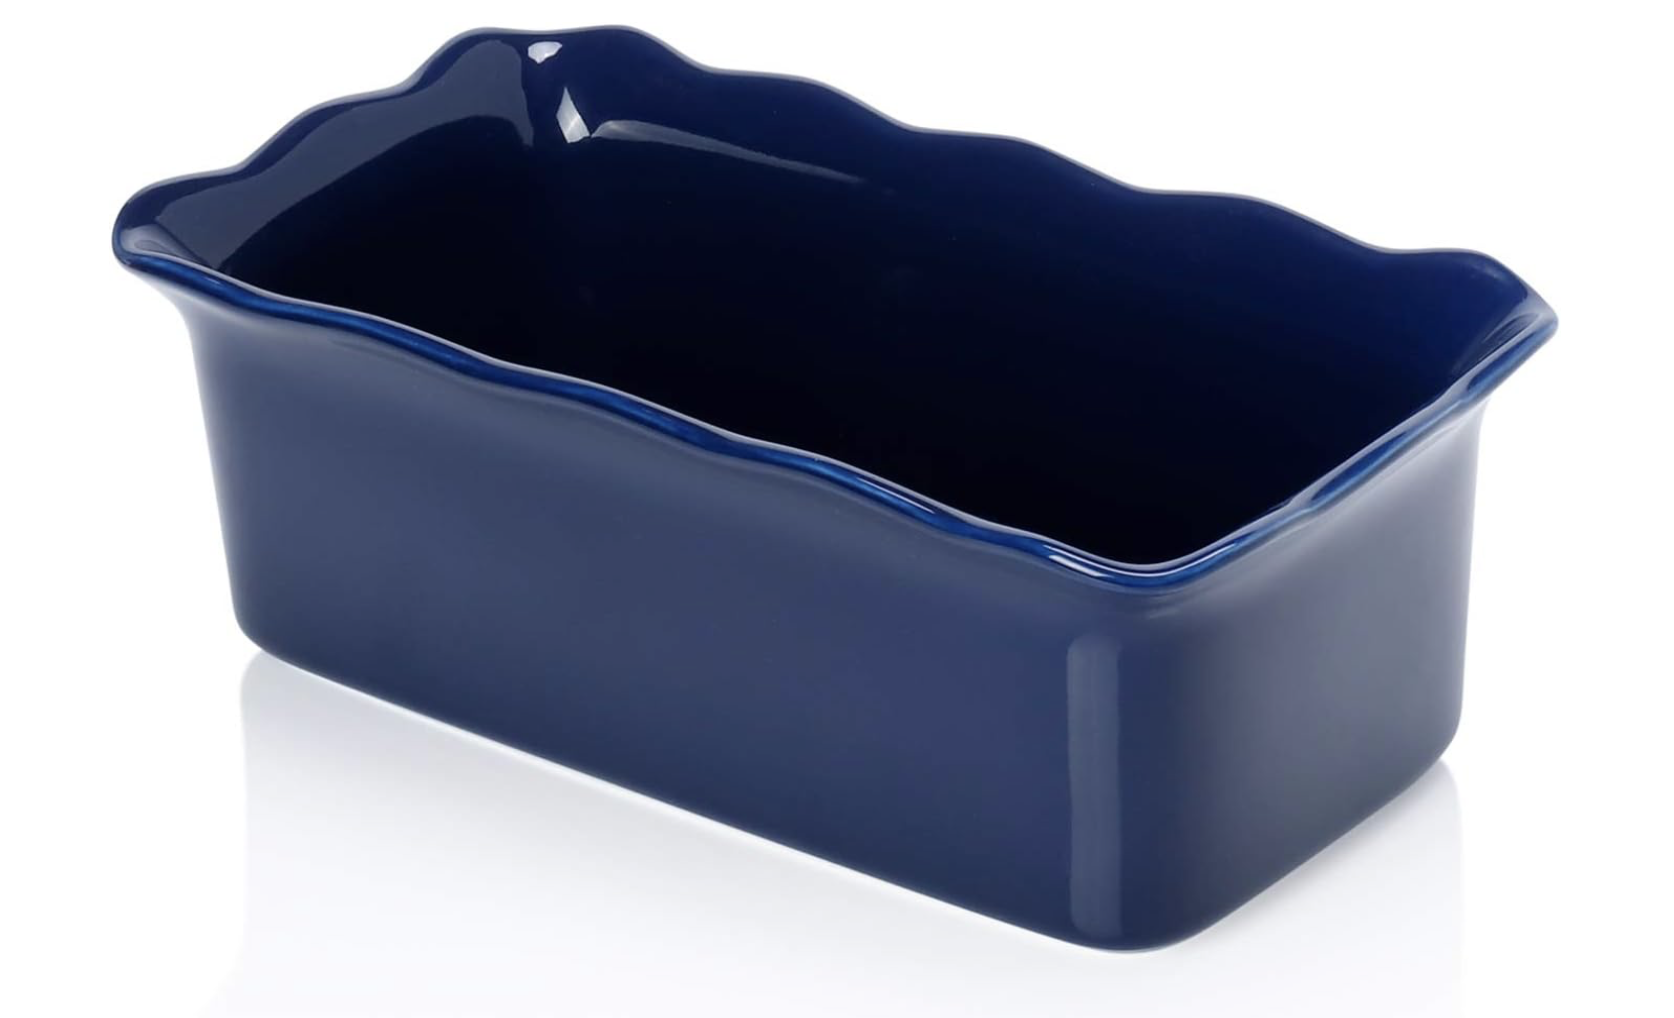 Sweese 519.103 Porcelain loaf pan for Baking, Non-Stick Bread Pan Cake Pan, Perfect for Bread and Meat, 9 x 5 inches, Navy